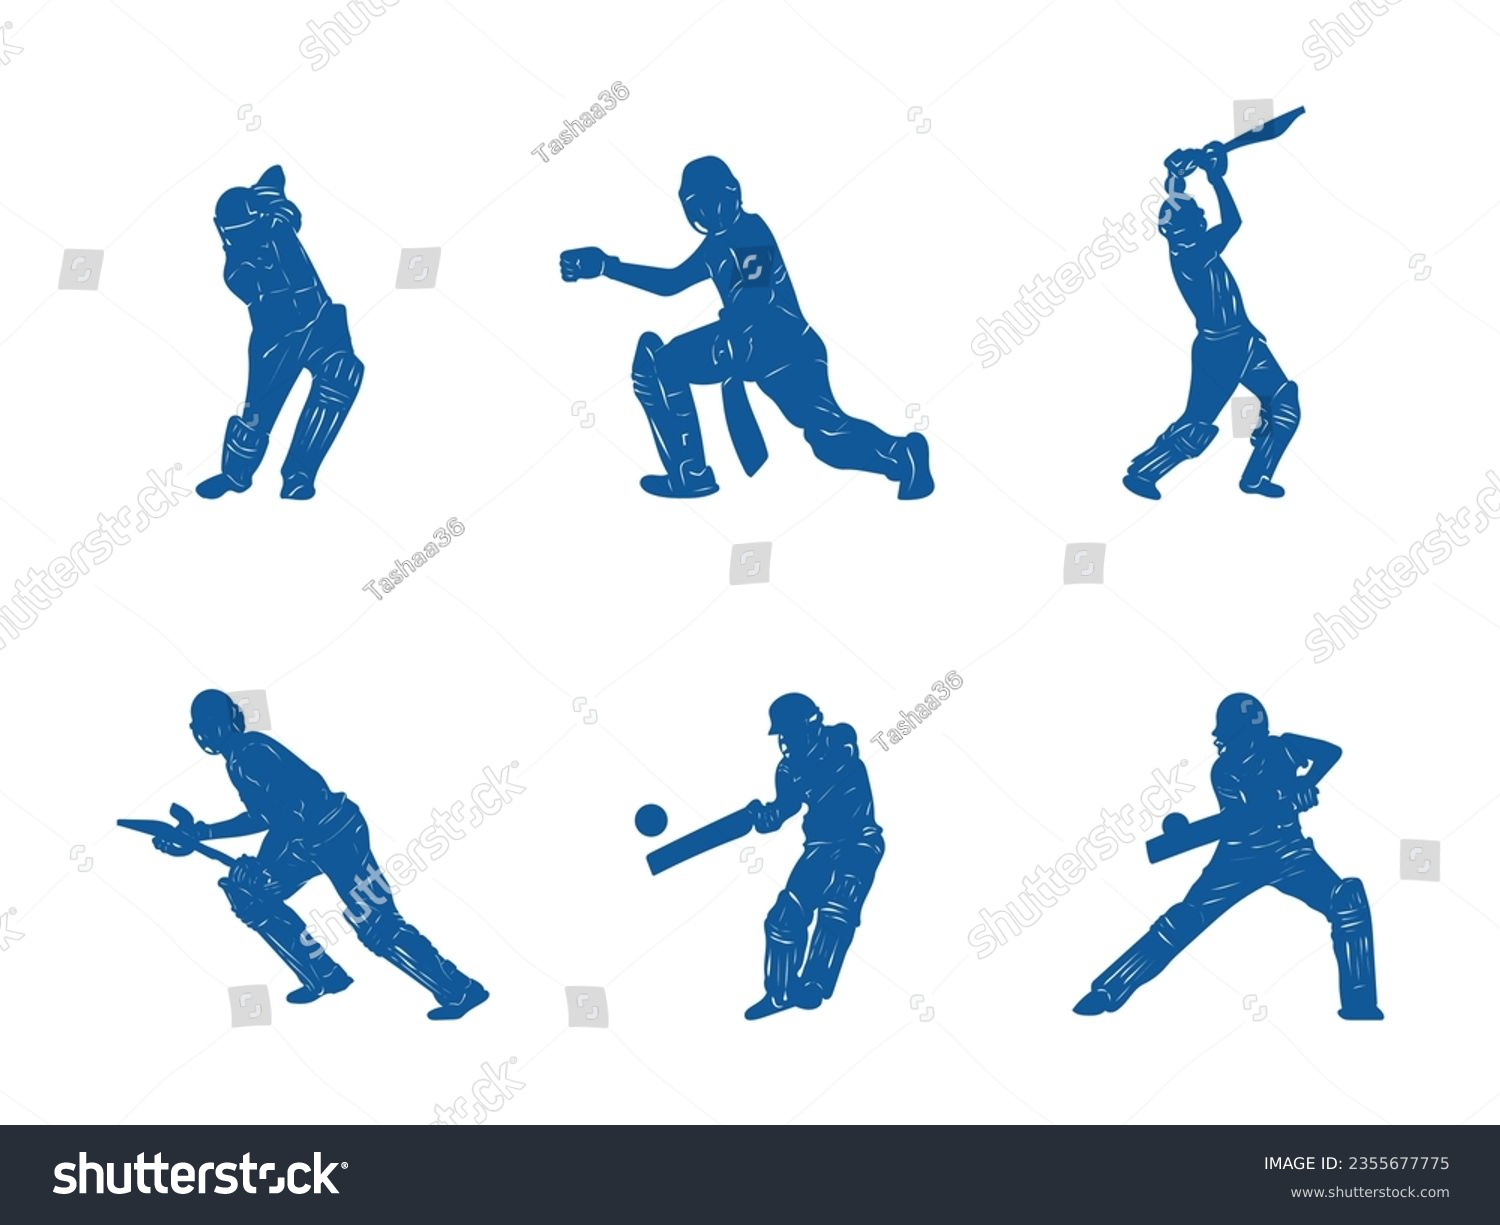 SVG of Collection of silhouettes of cricket players, batsmen, cricket elements. svg